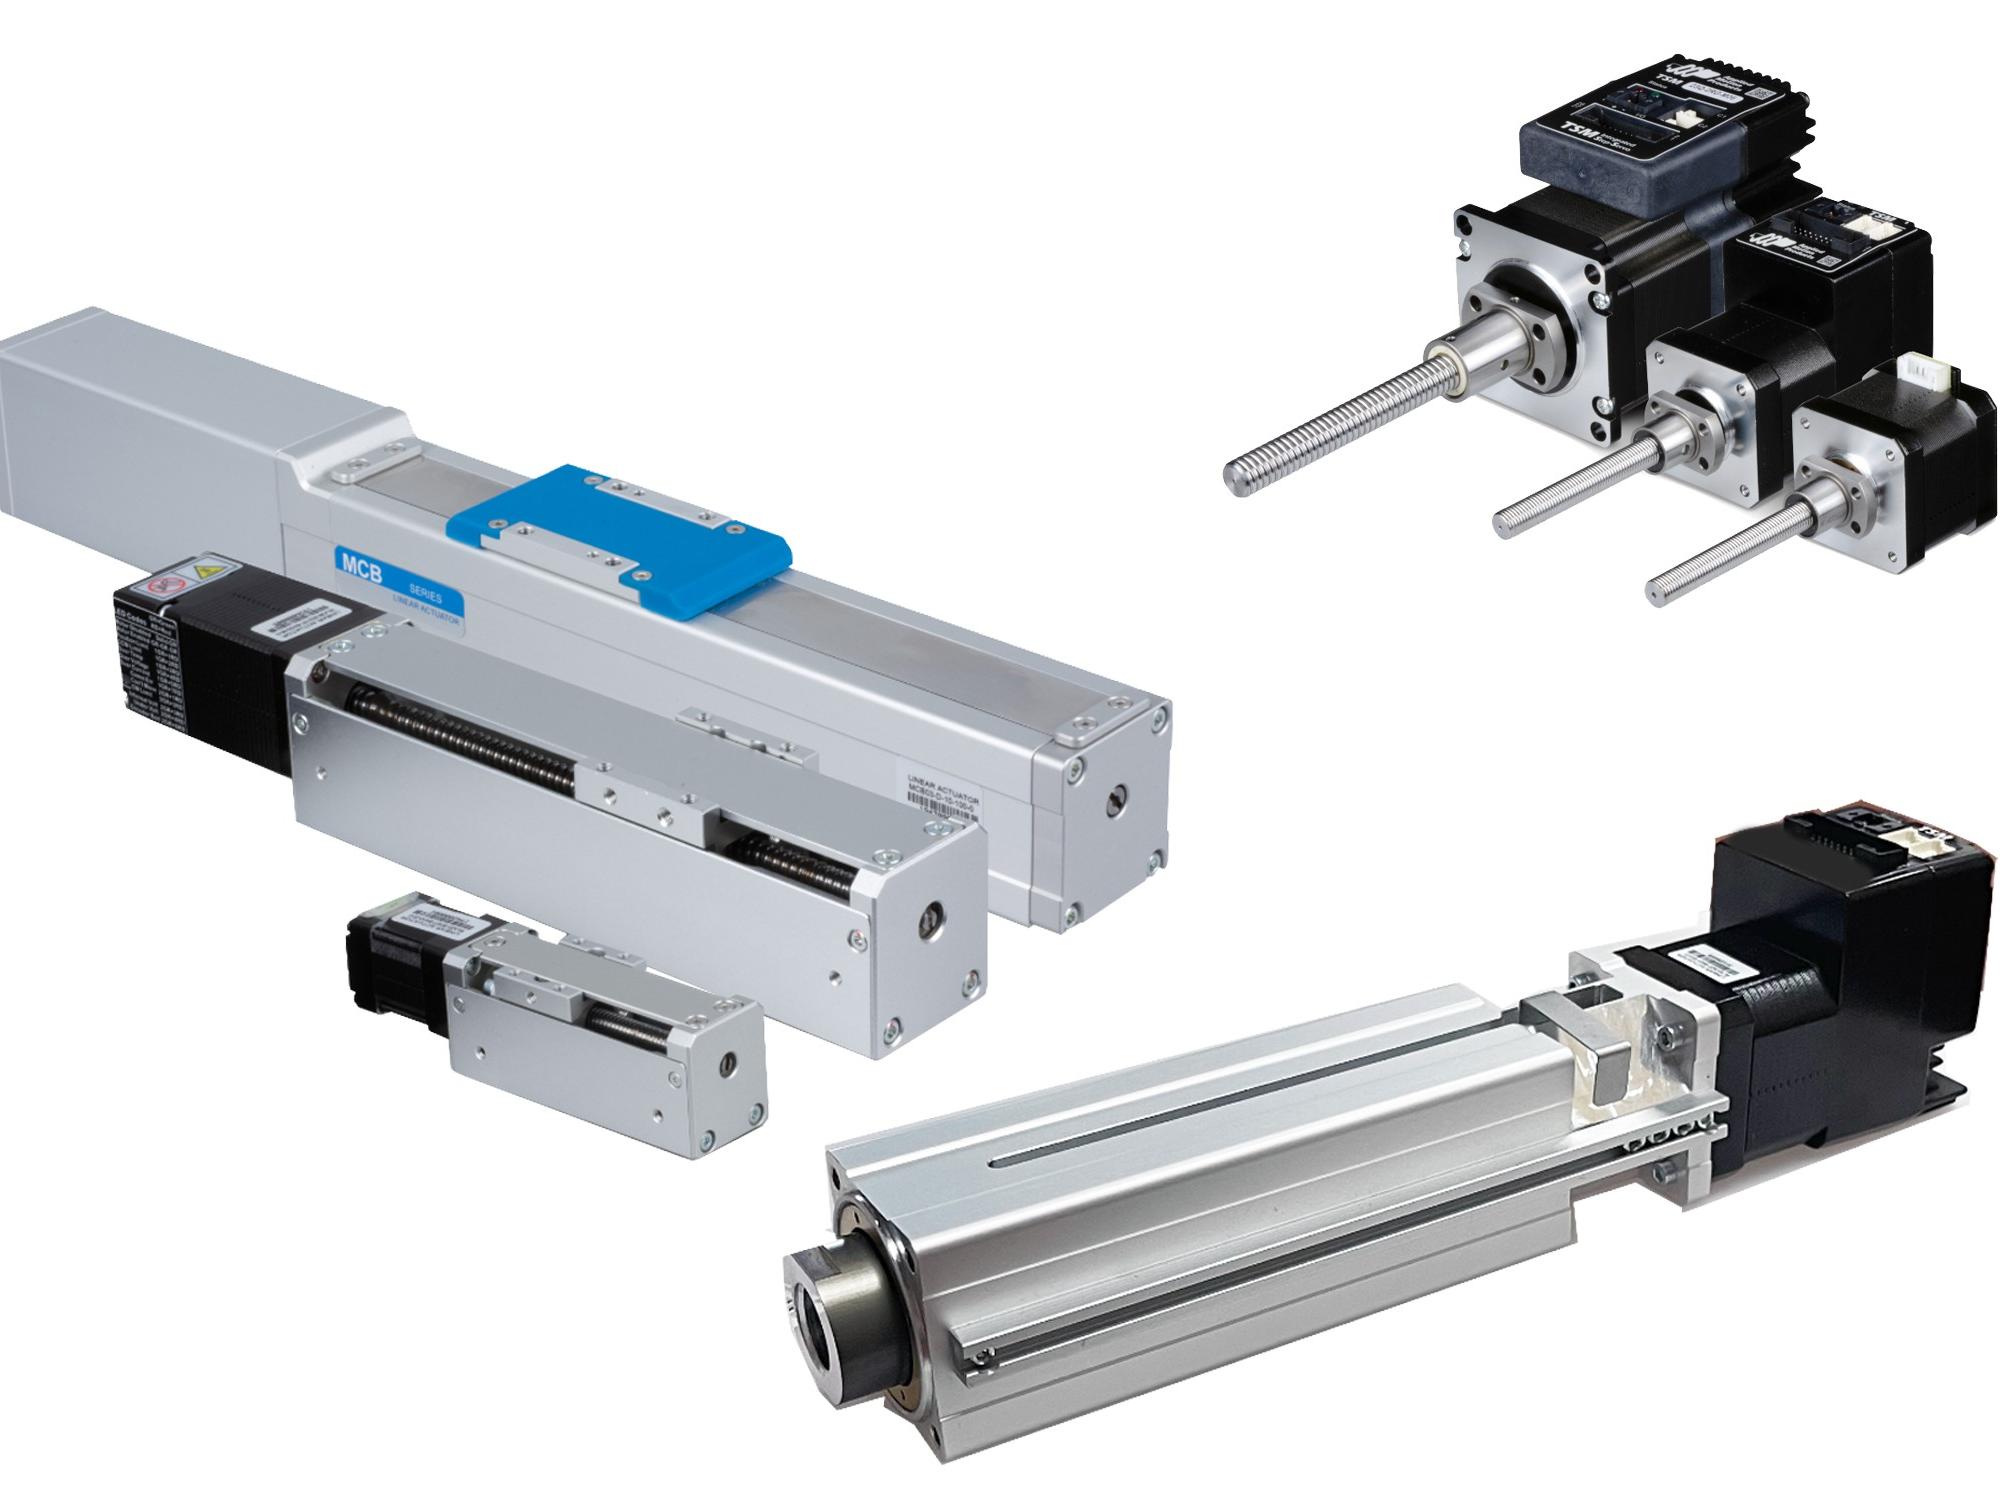 Smart actuators provide an all-in-one linear positioning solution